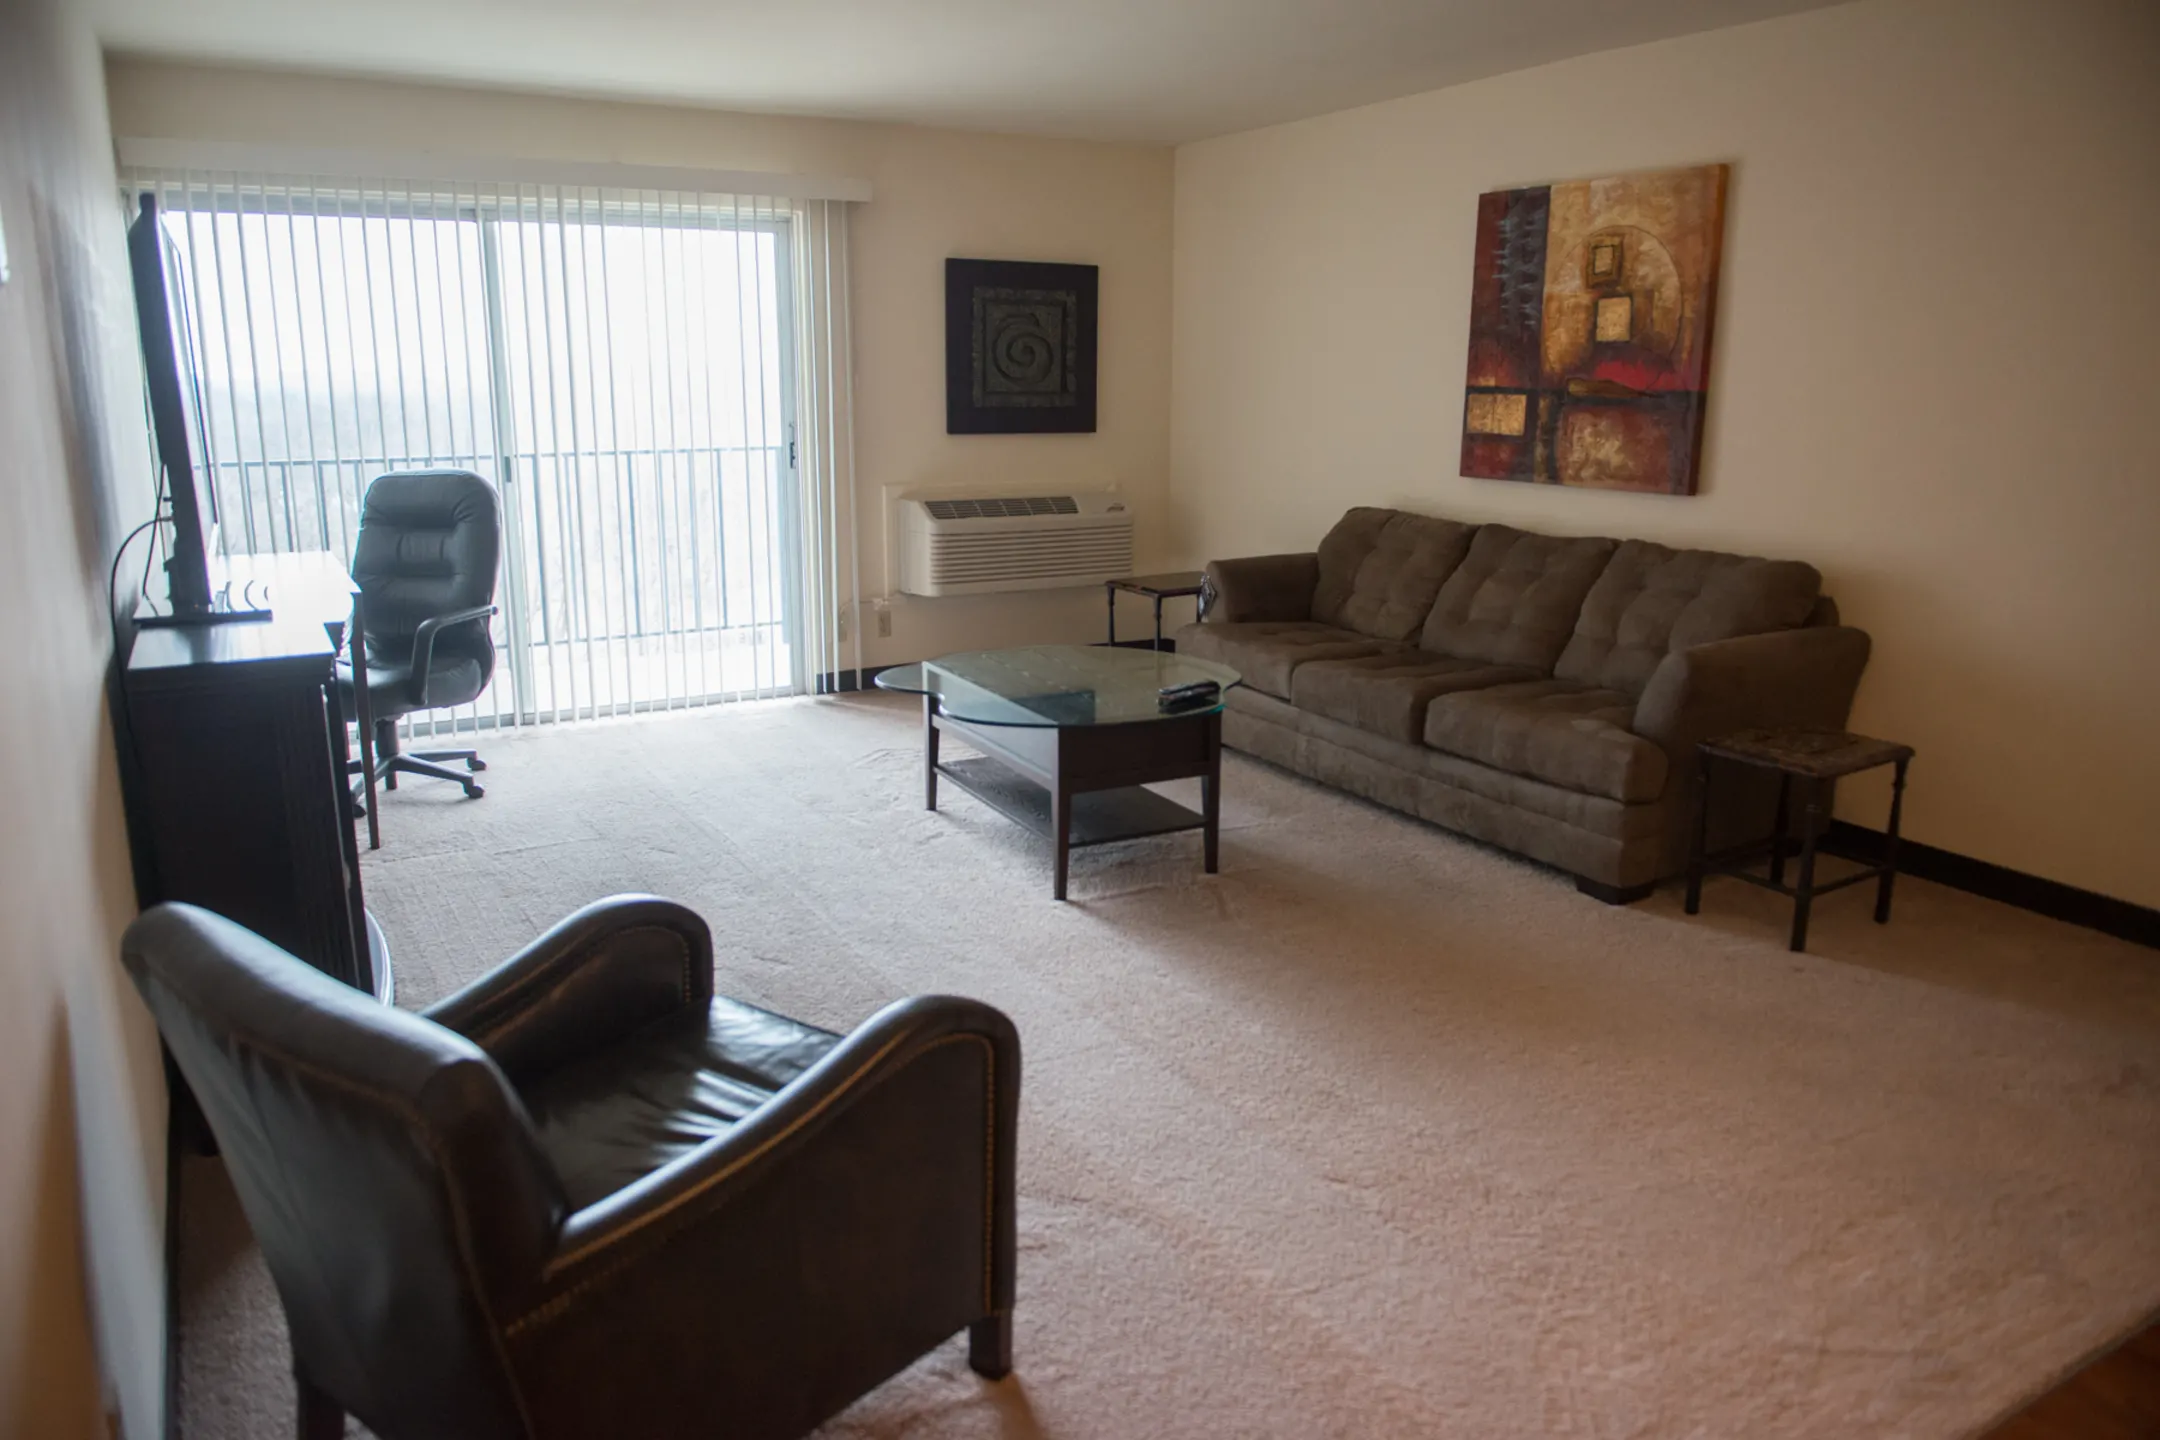 Living Room - Portage Trail East - Cuyahoga Falls, OH